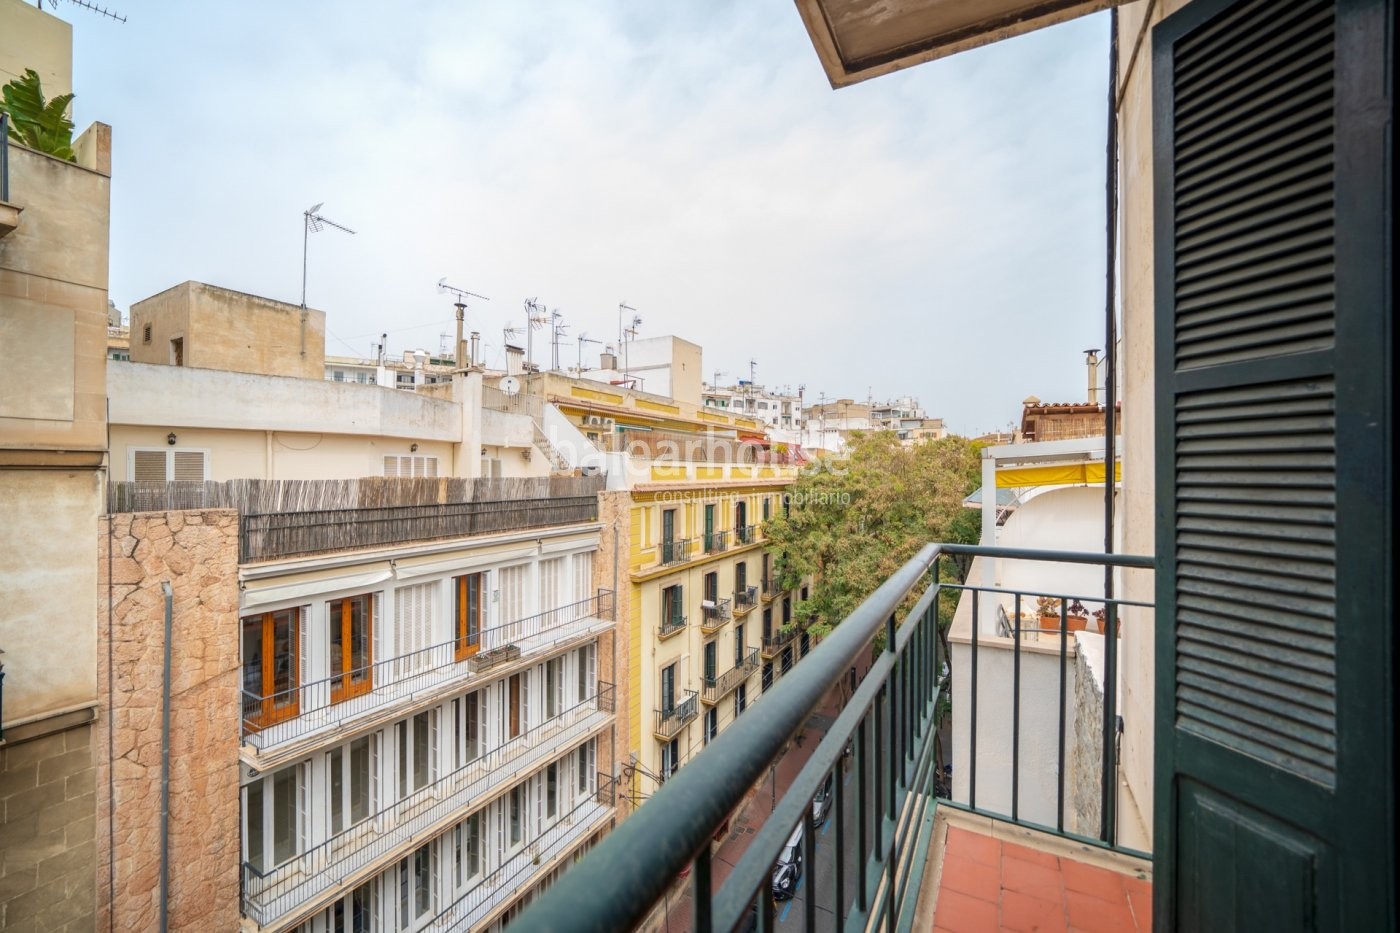 Excellent flat full of light and with a privileged location in the Jaime III avenue in Palma.